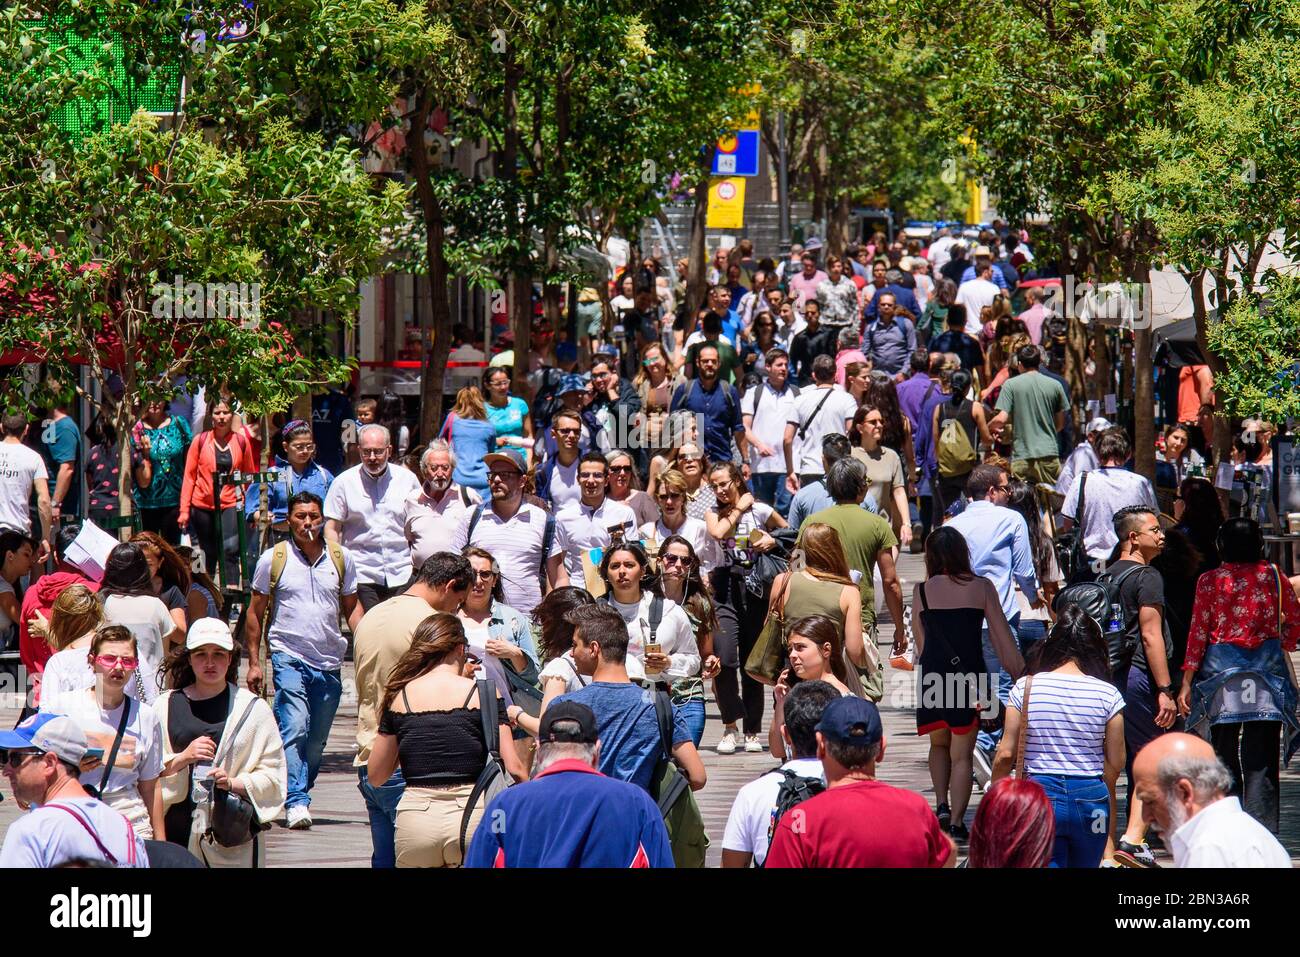 Crowds of people on the street in Madrid, Spain Stock Photo